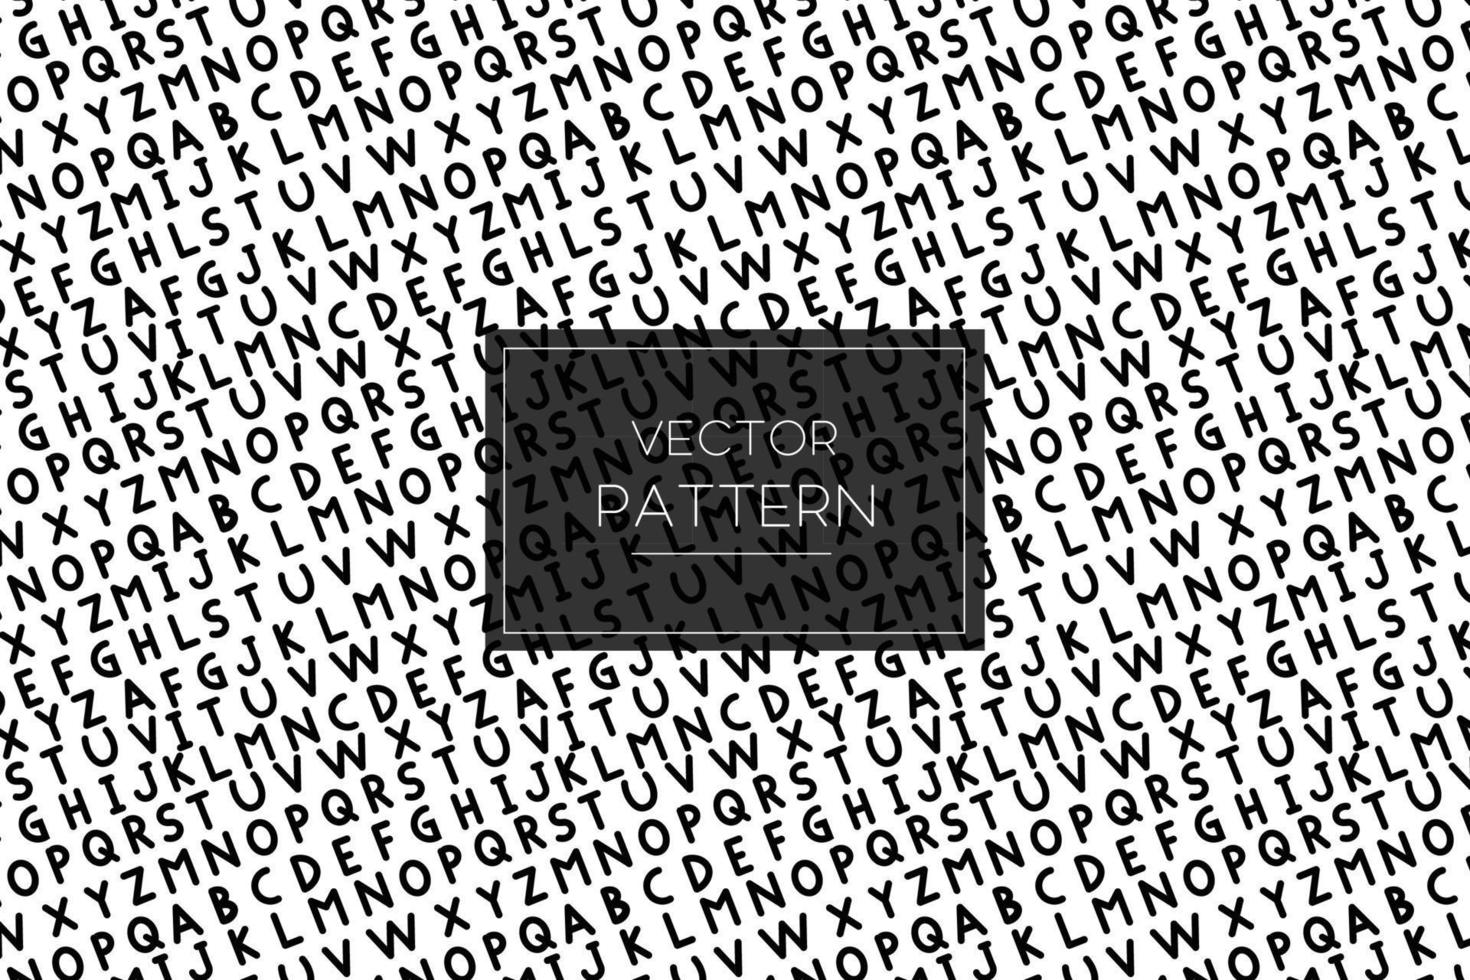 Alphabet letters in black and white slanting seamless vector pattern